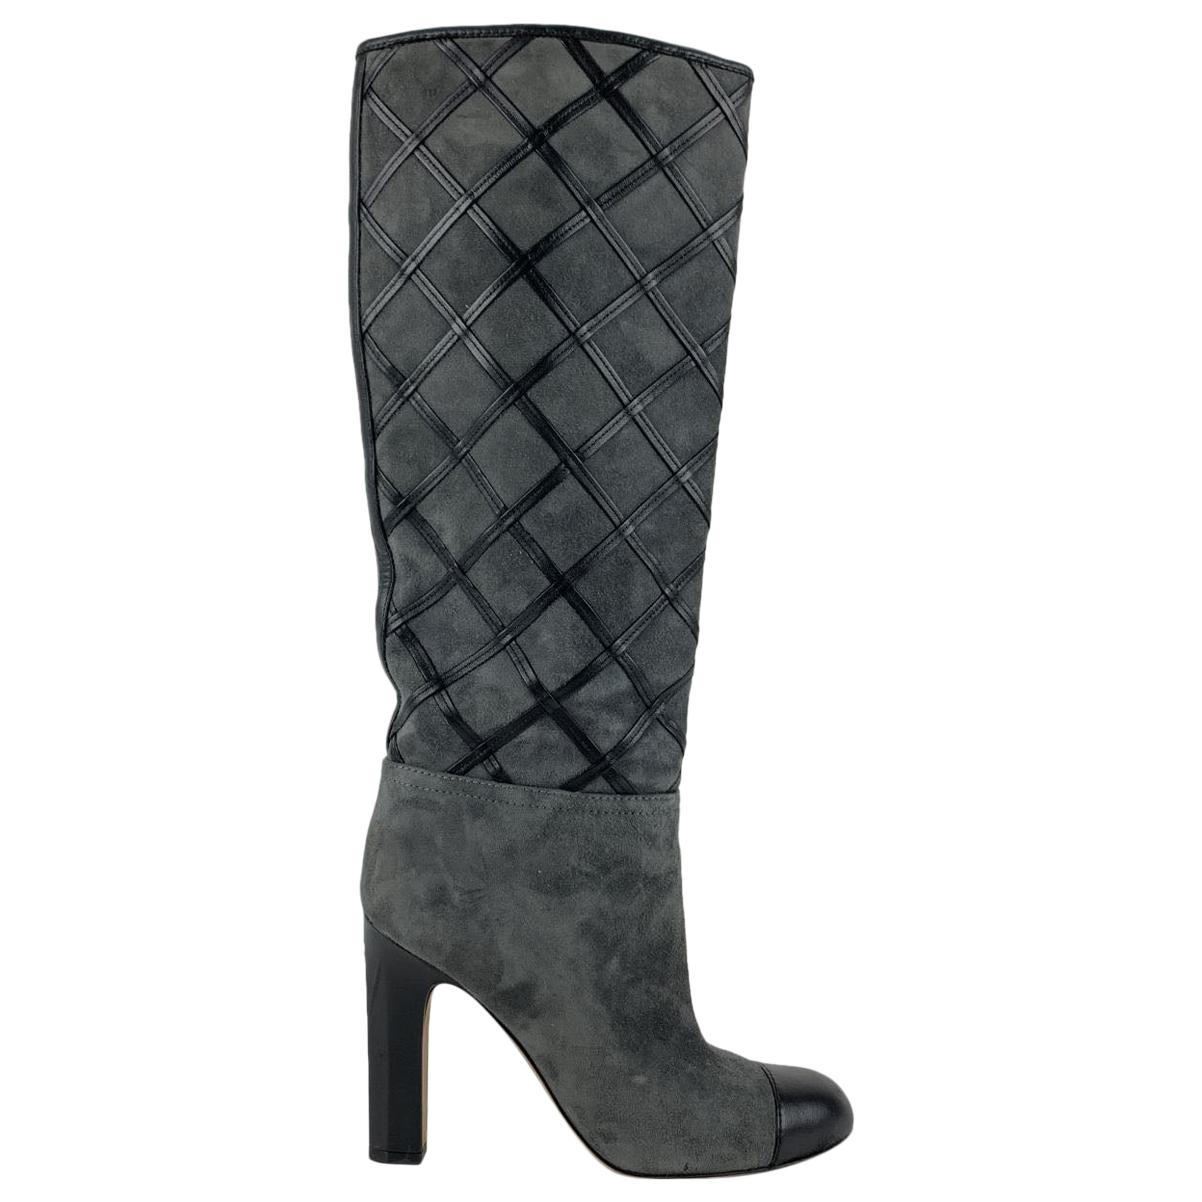 Chanel Grey Suede Quilted Knee High Boots Size 36 C